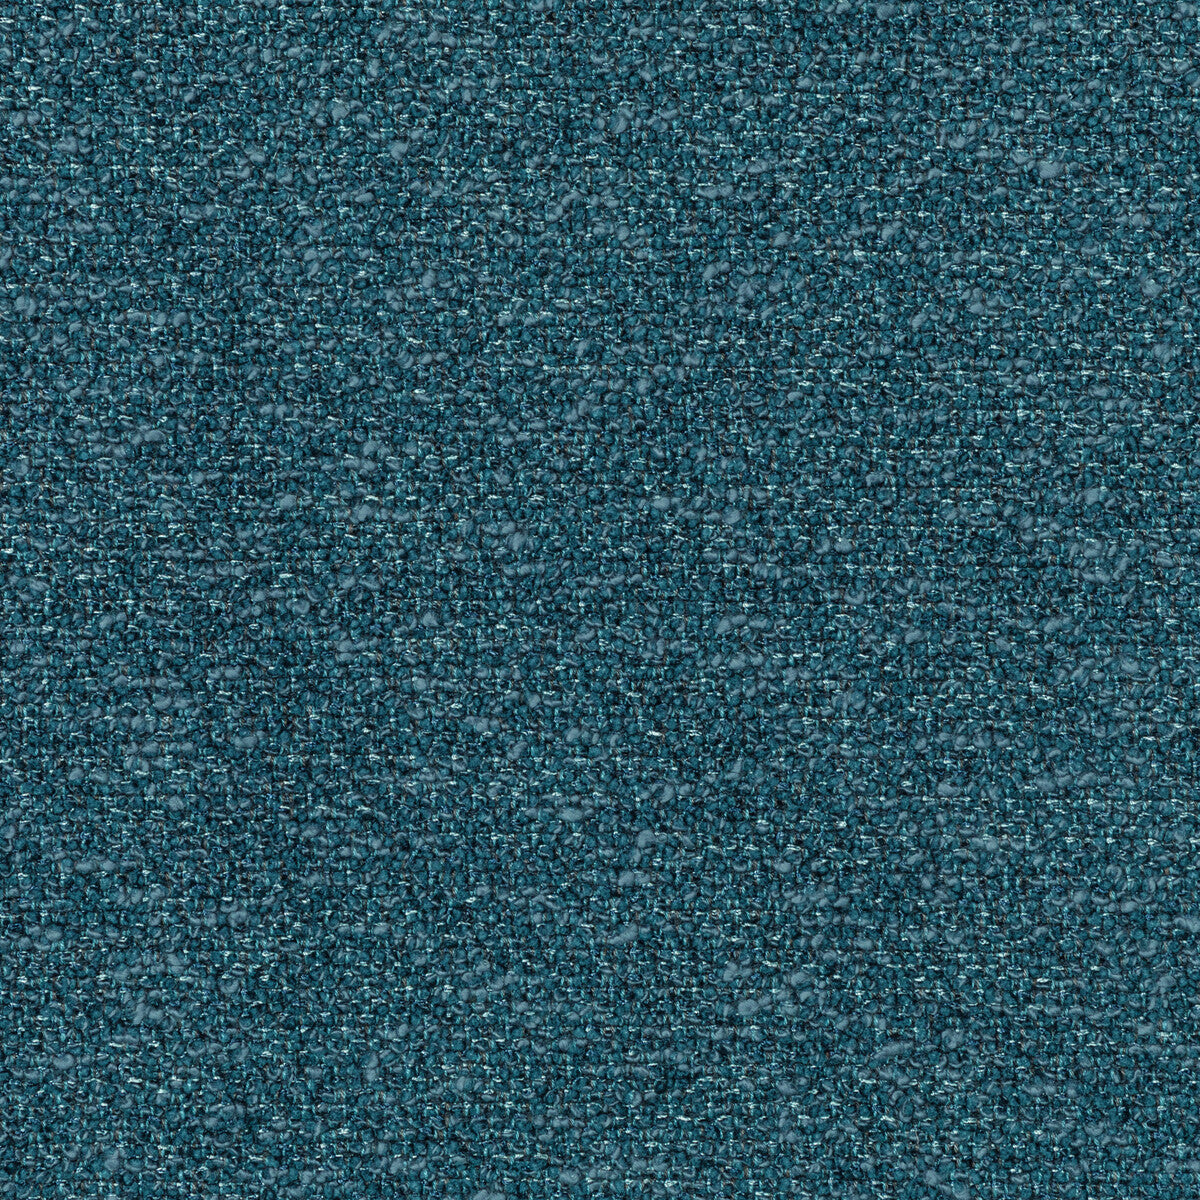 Bali Boucle fabric in indigo color - pattern 36051.5.0 - by Kravet Couture in the Luxury Textures II collection